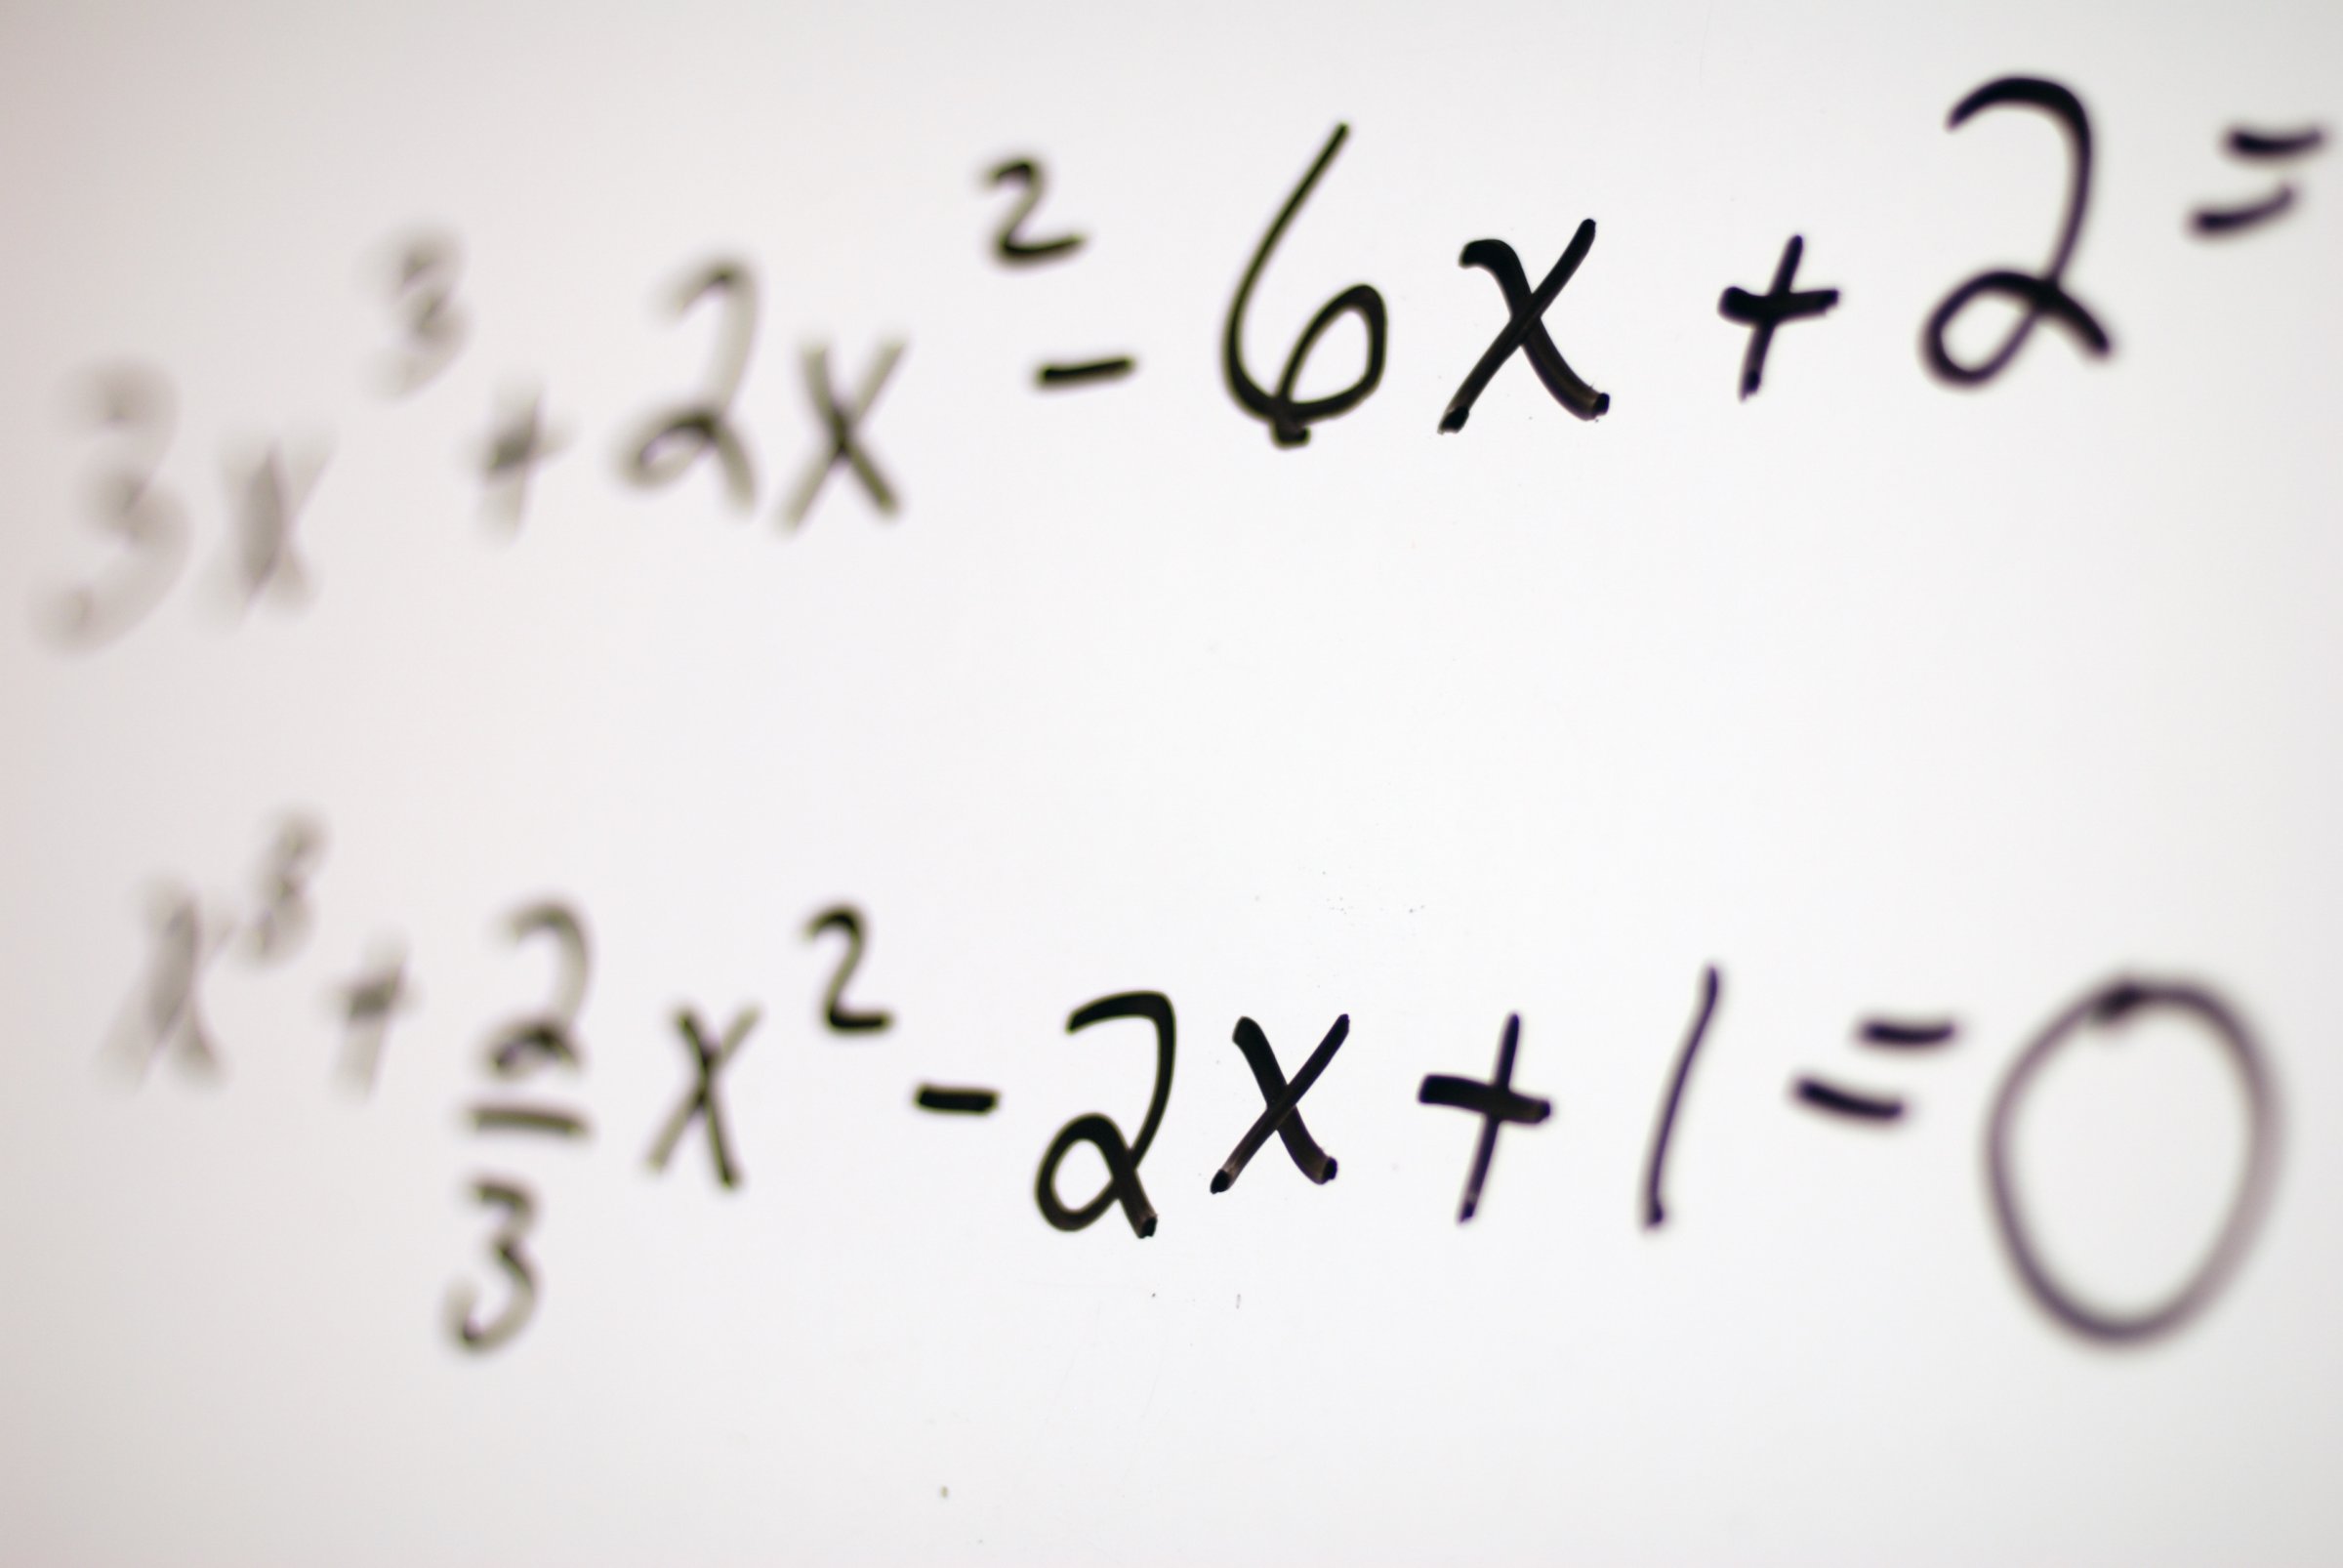 Fading to clear math equations on white board